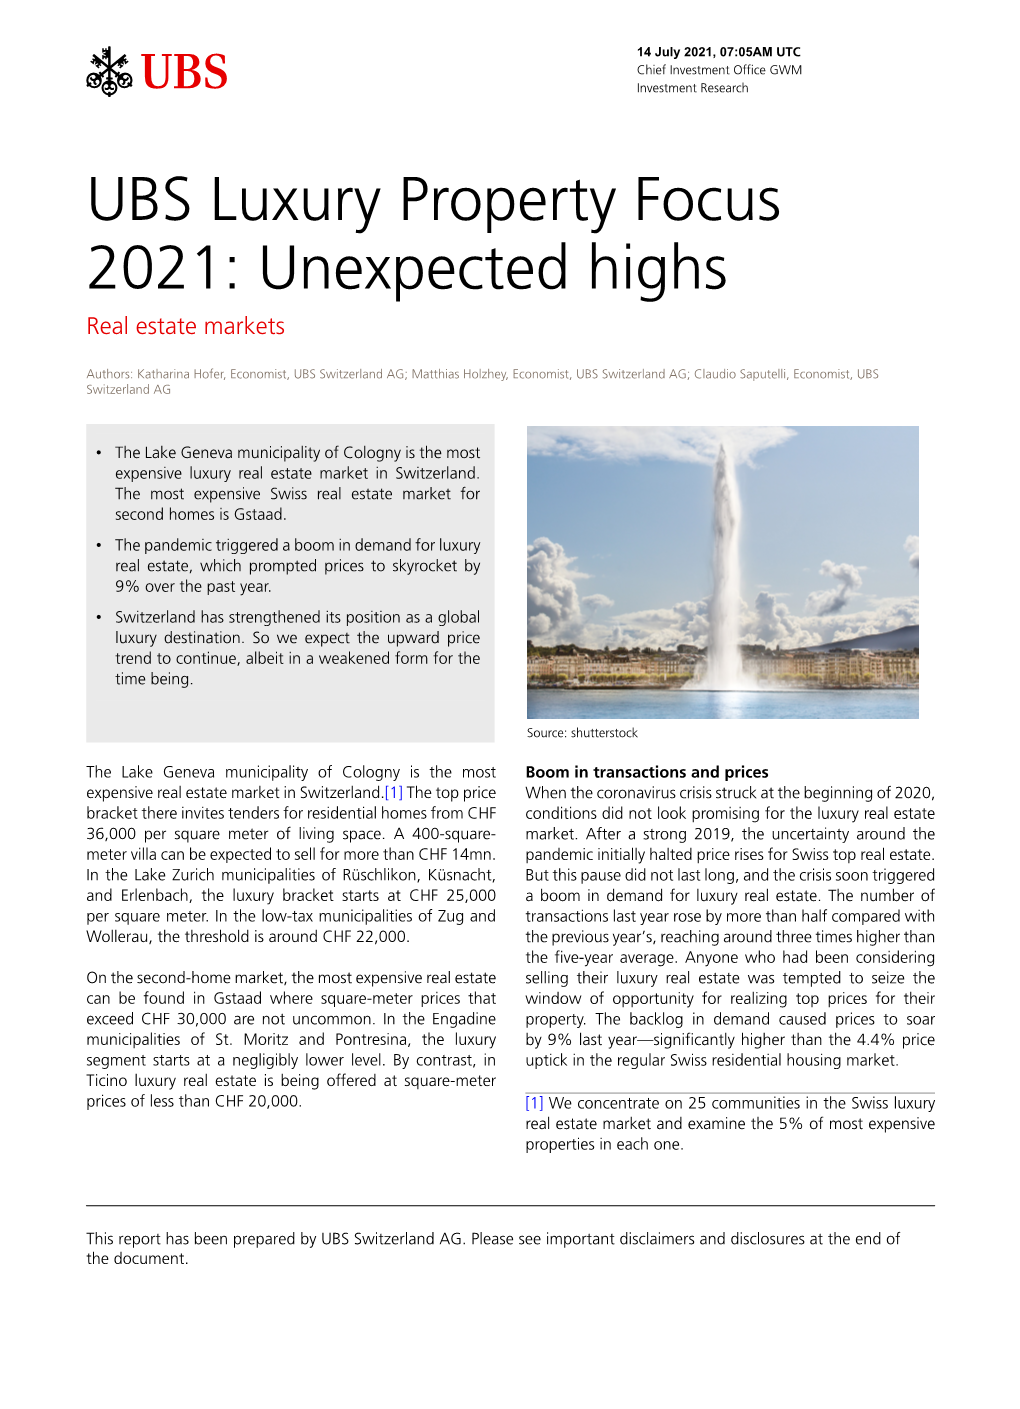 UBS Luxury Property Focus 2021: Unexpected Highs Real Estate Markets